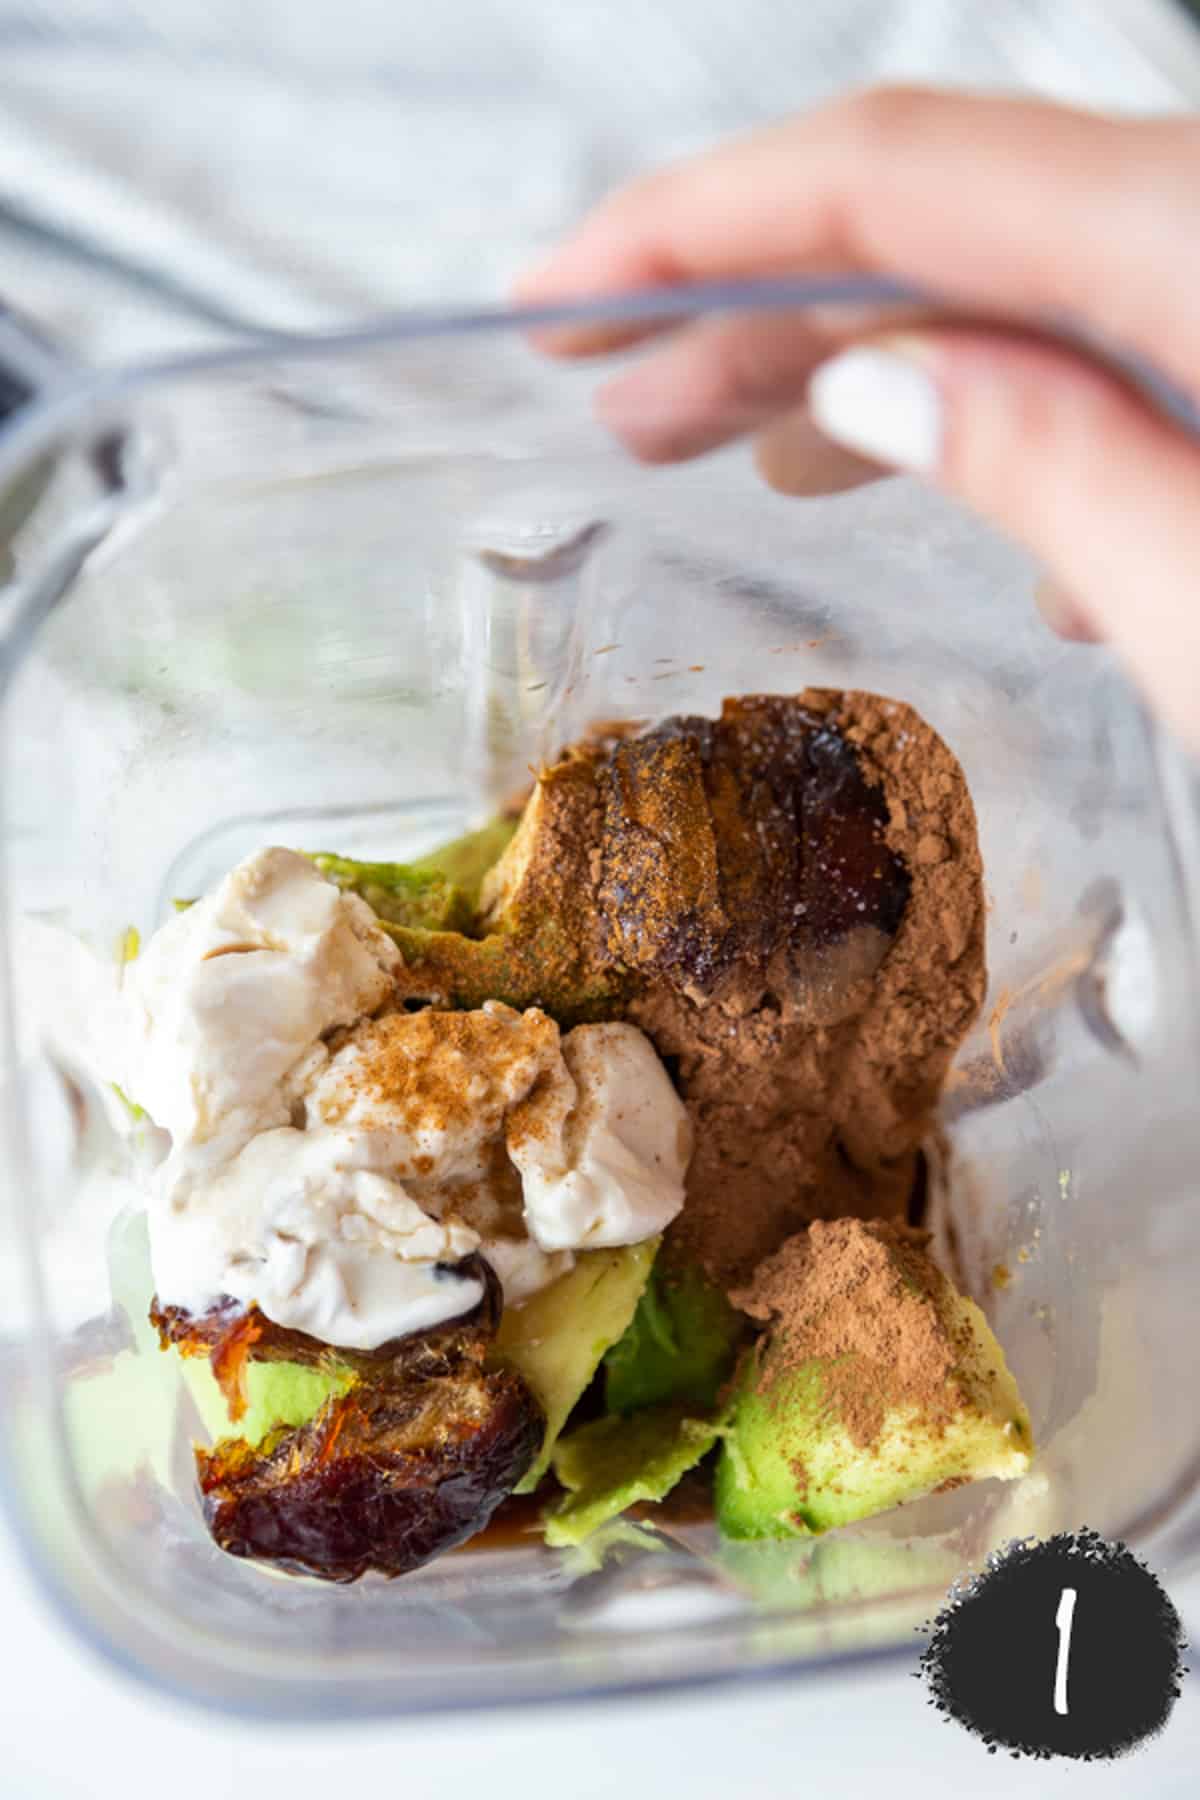 A blender with avocado, cocoa powder, dates, and cream.